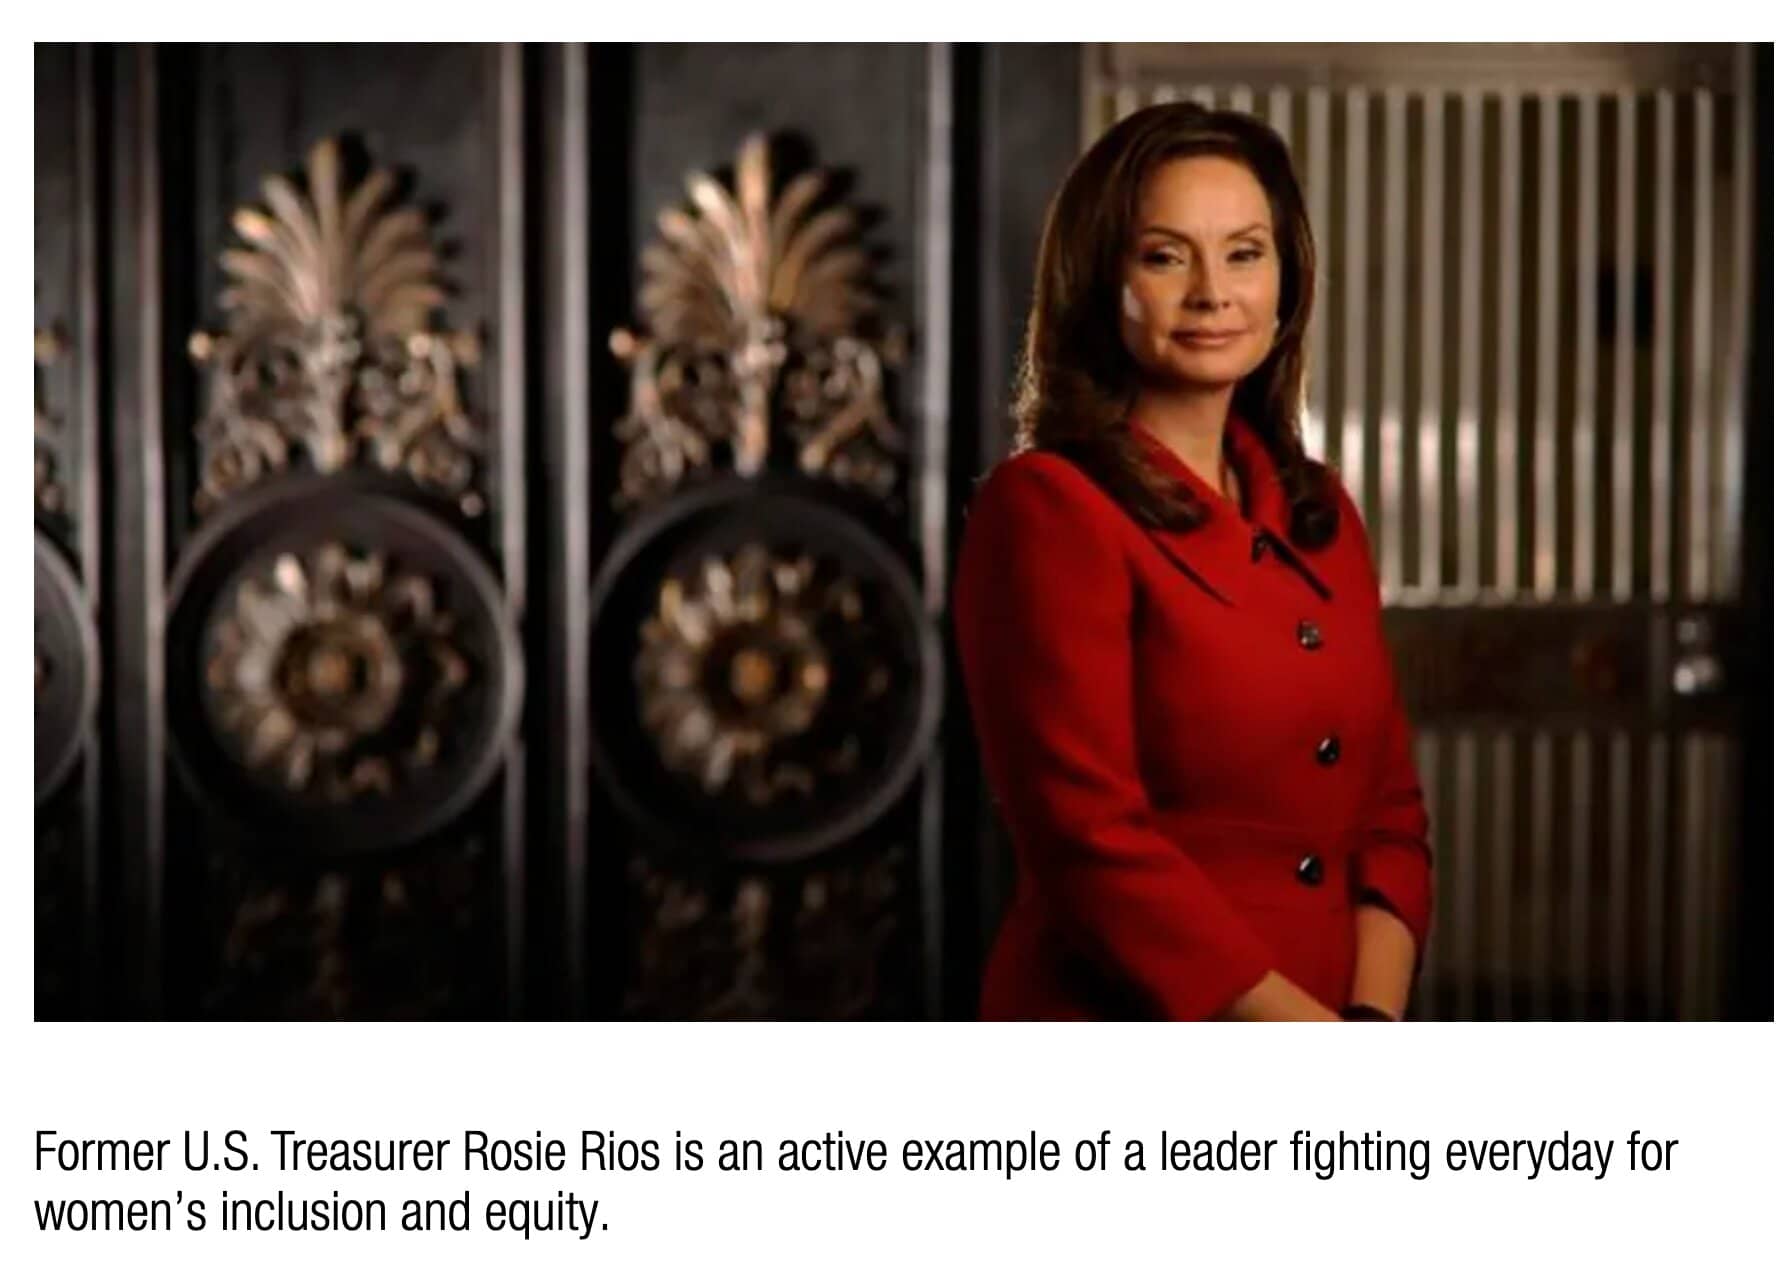 Former Treasurer of the United States Rosie Rios and our Unicorn Hunters show